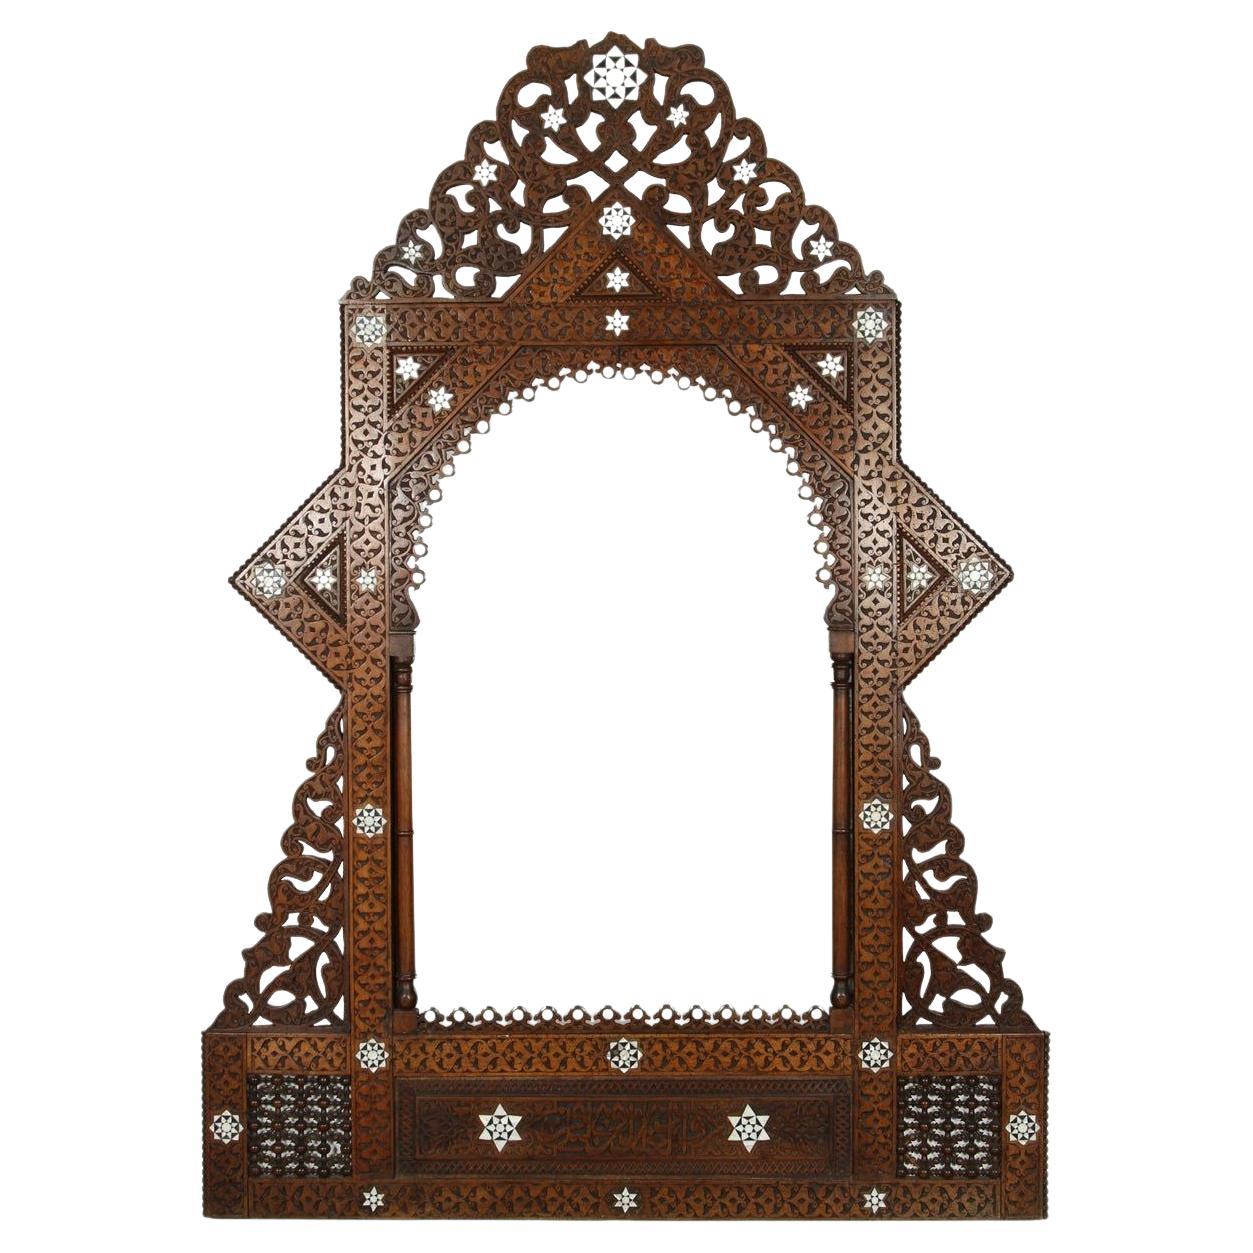 Antique 19th c. Syrian Damascus mirror with mother of pearl